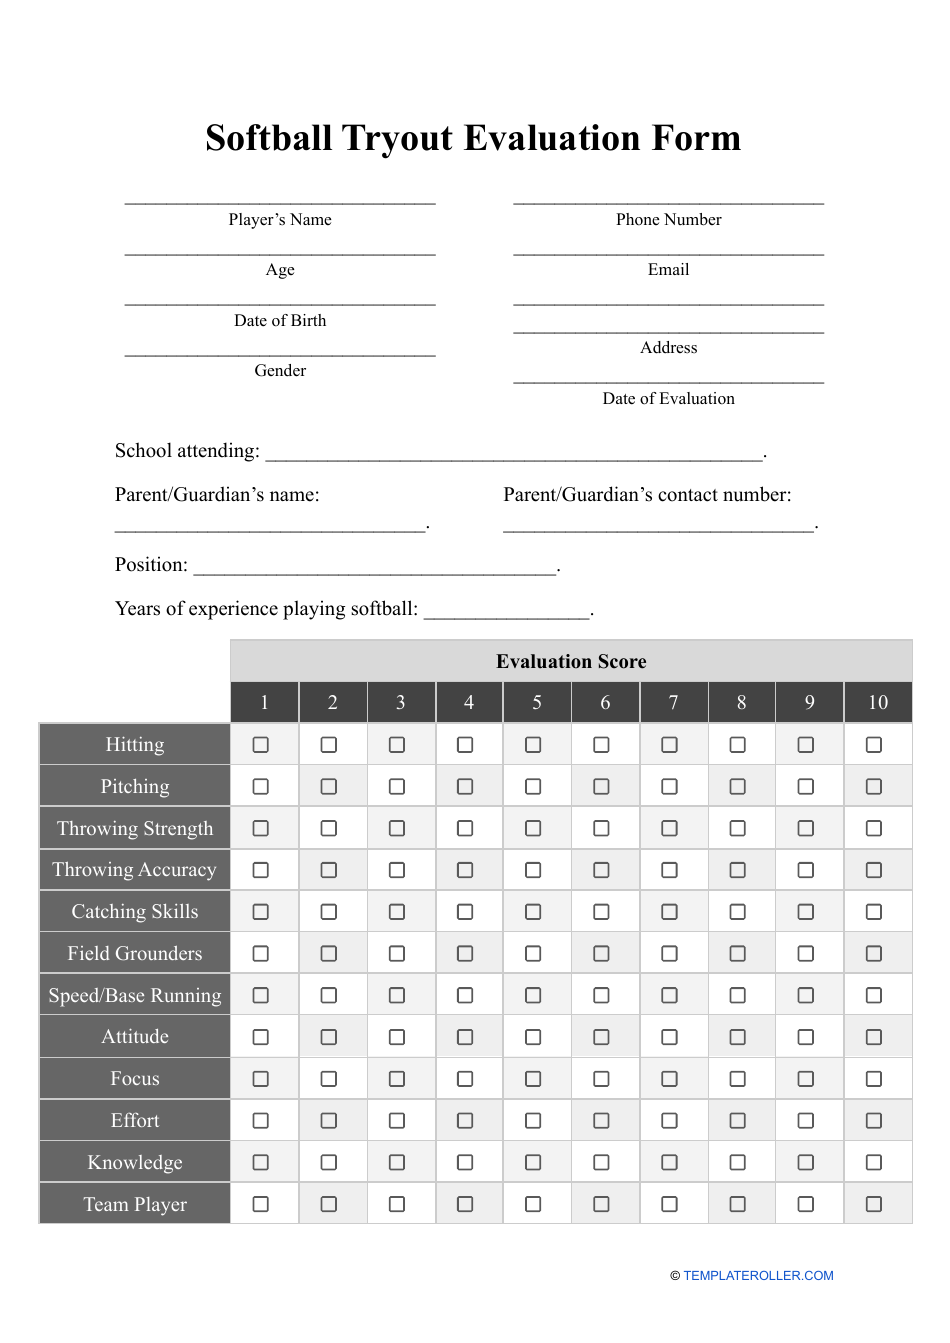 softball-tryout-evaluation-form-fill-out-sign-online-dochub